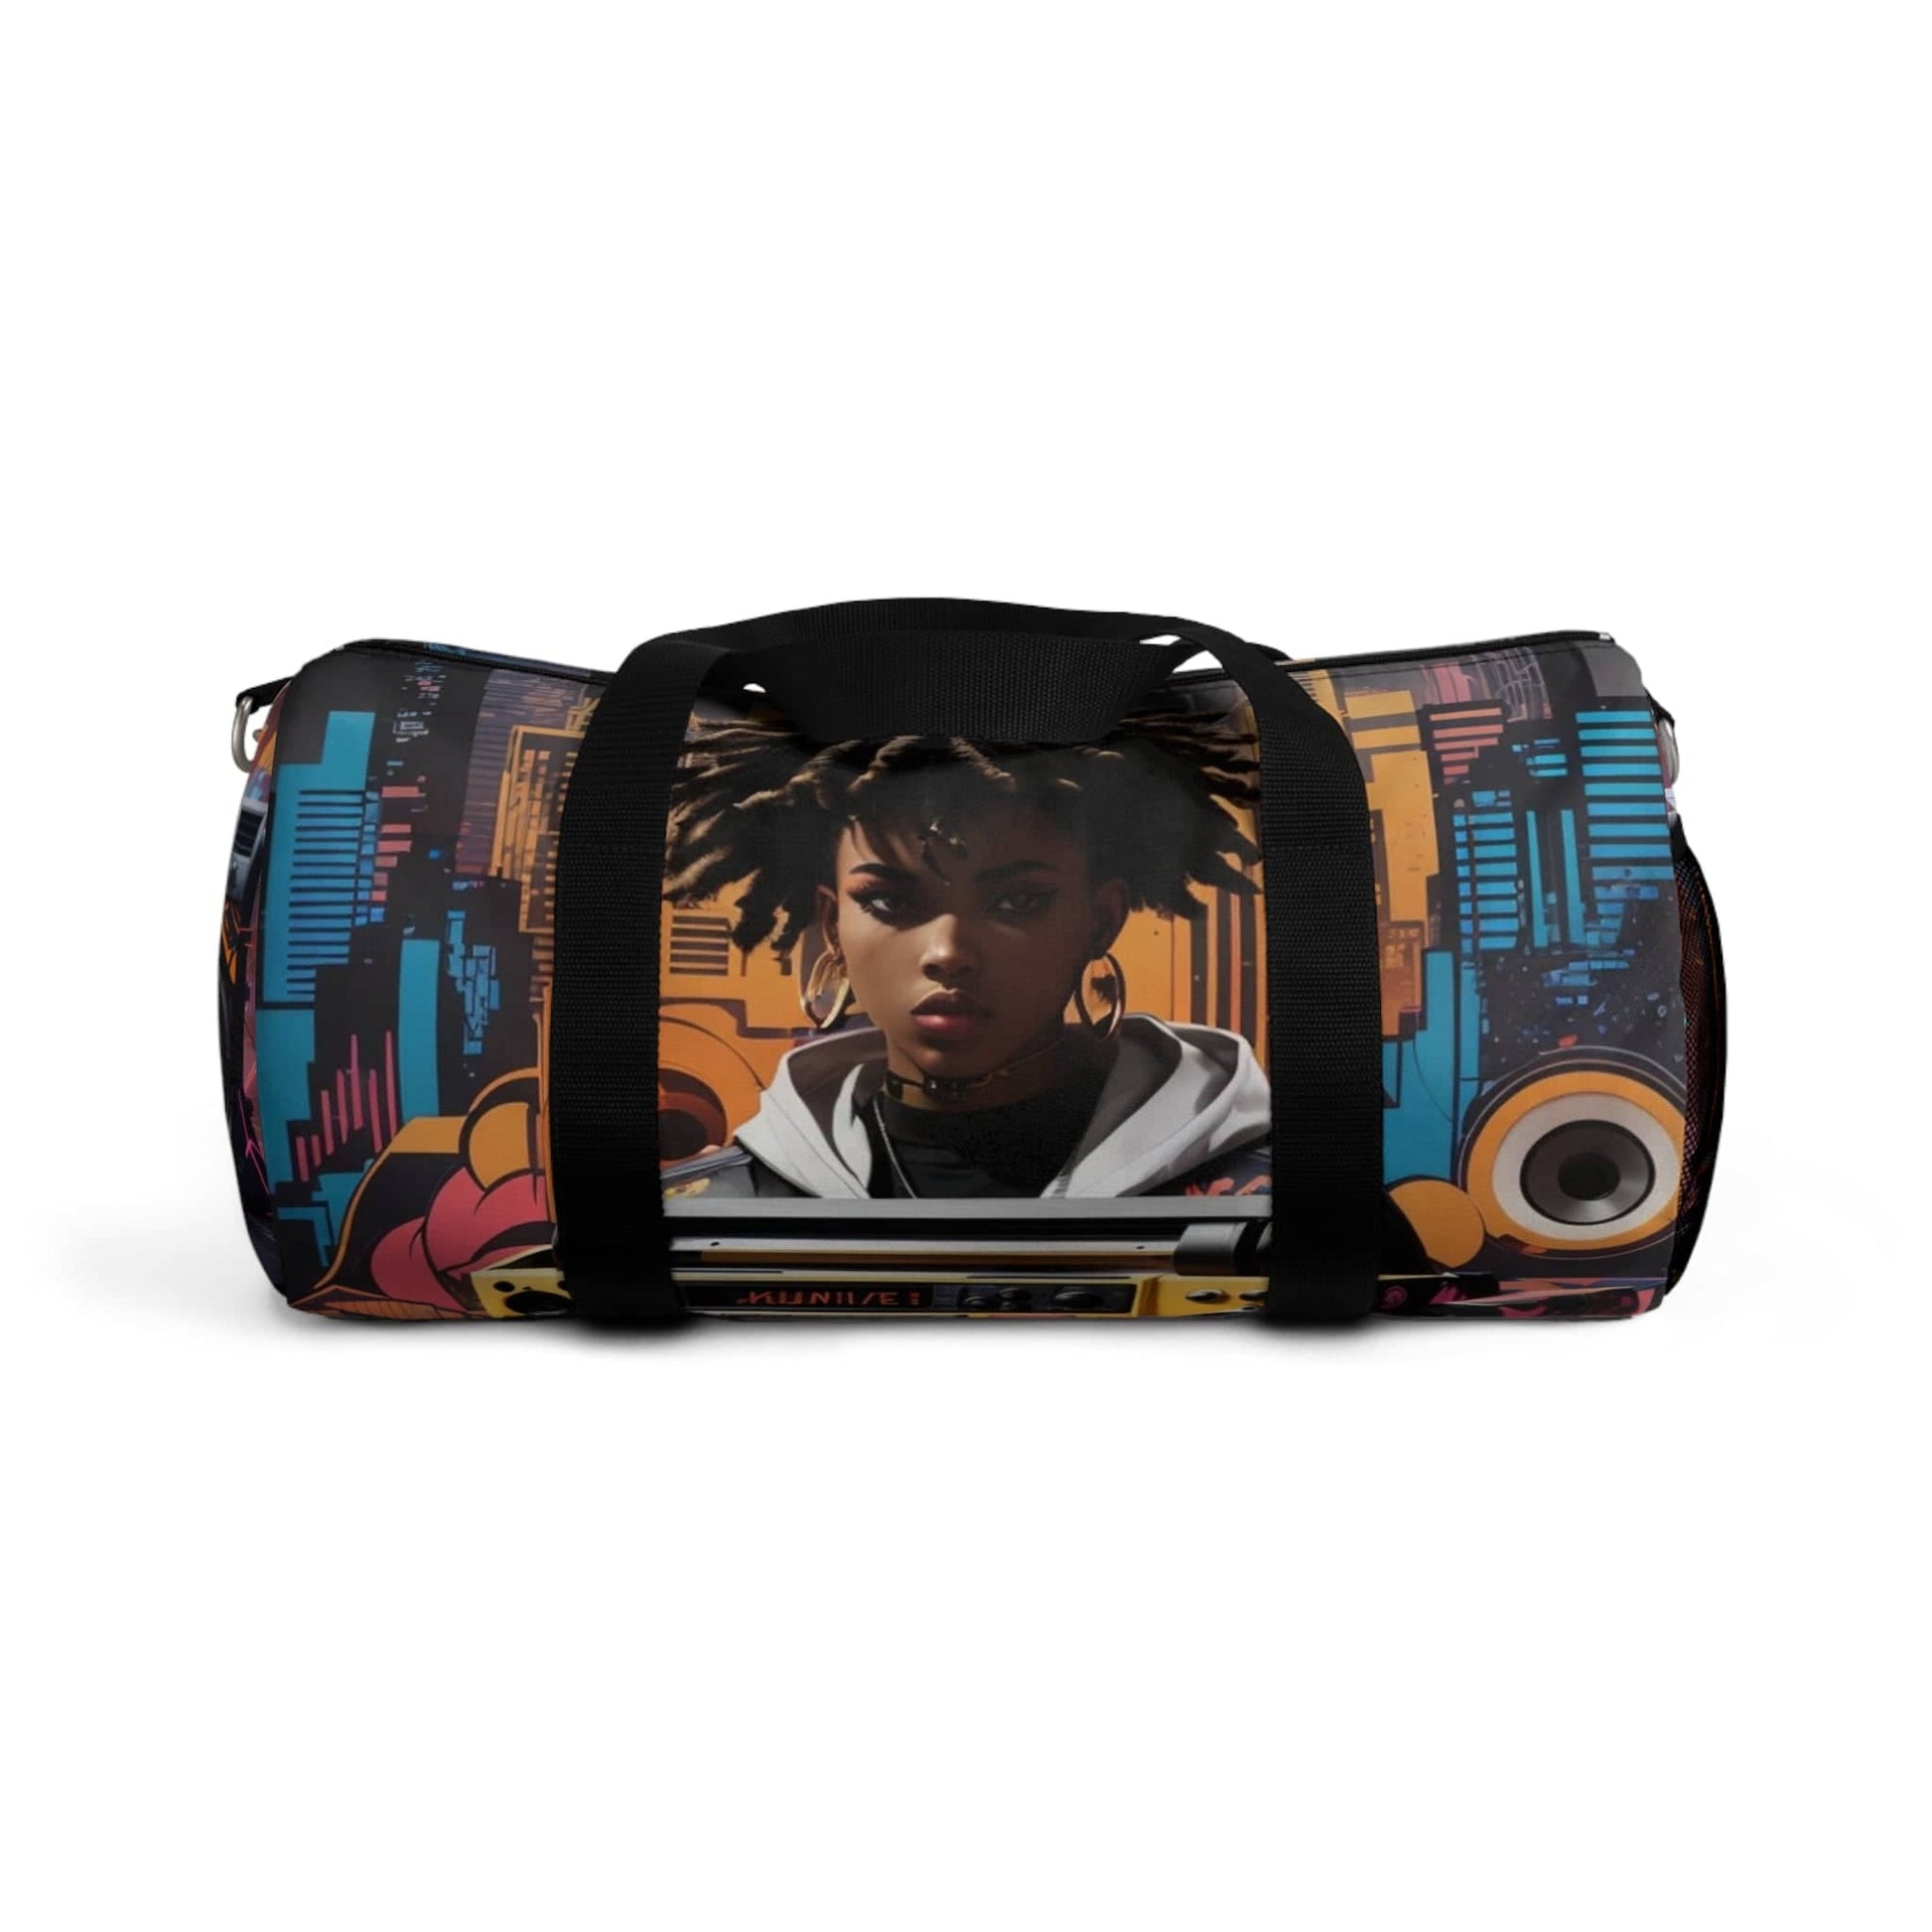 "RhythmRover: The Dynamic Canvas Hip-Hop Duffle Bag for Gym, Travel, Music Enthusiasts, and Urban Trendsetters" Bags Bigger Than Life   